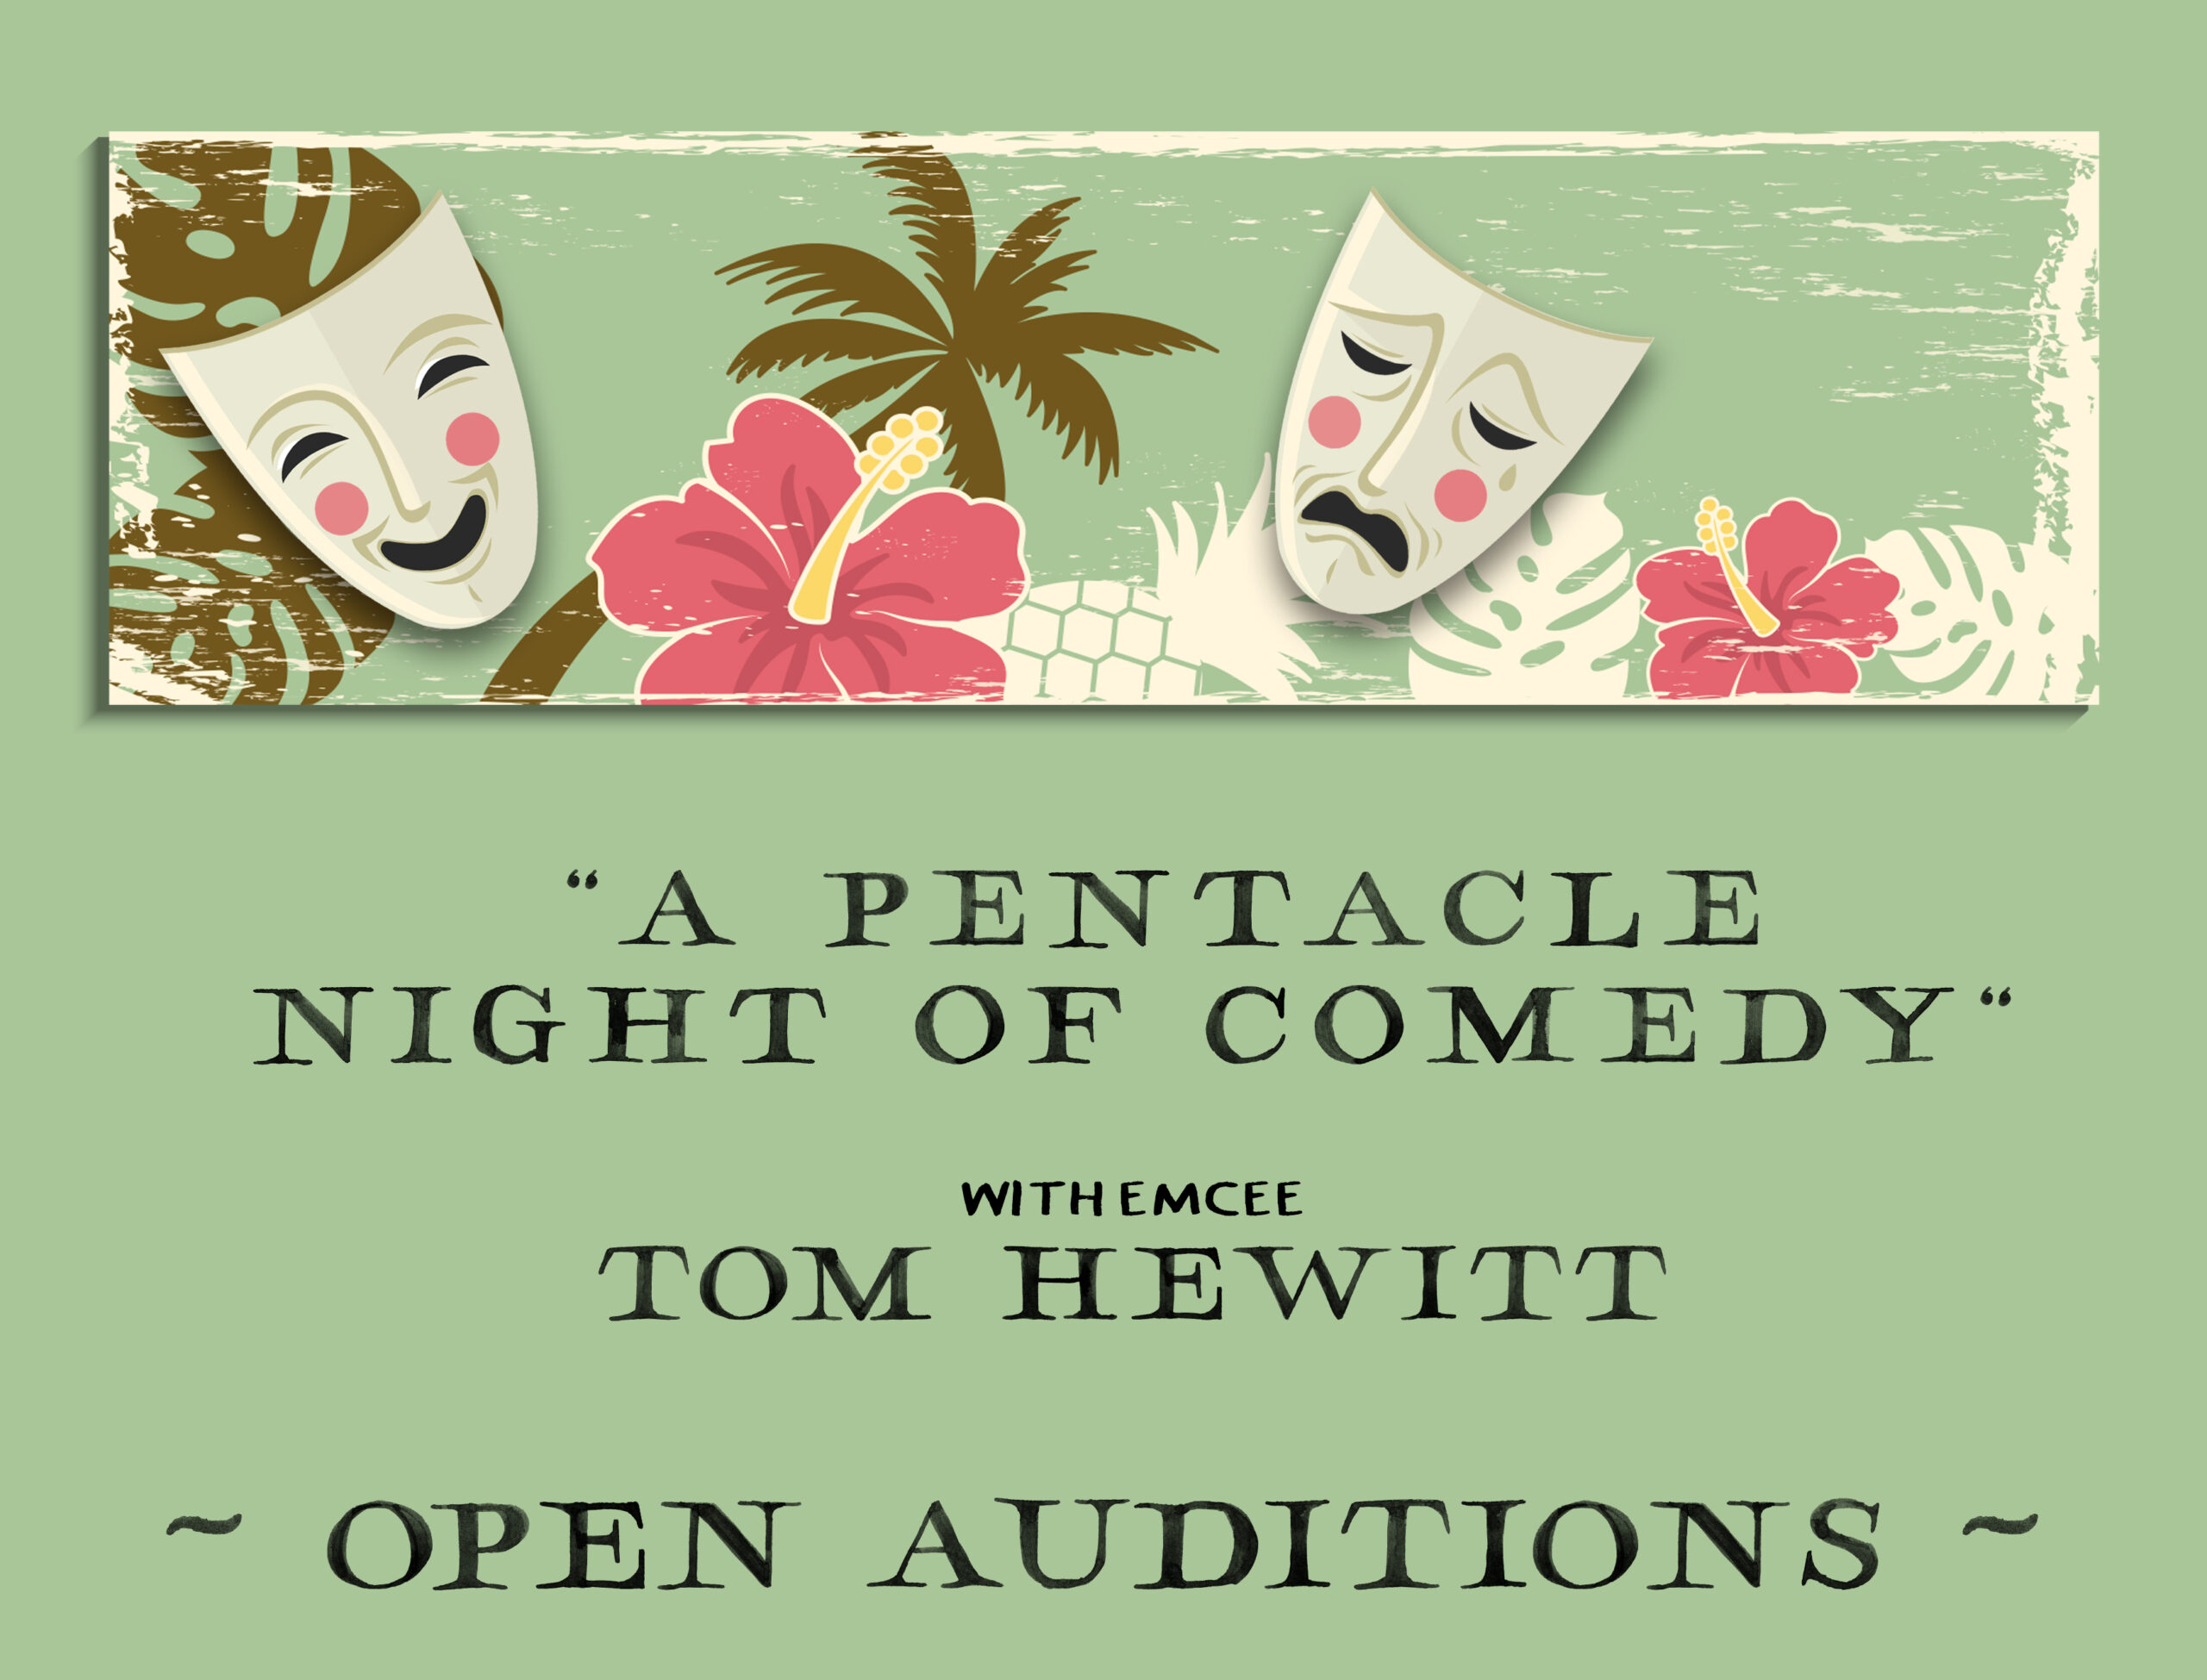 Auditions for “A Pentacle Evening of Comedy”